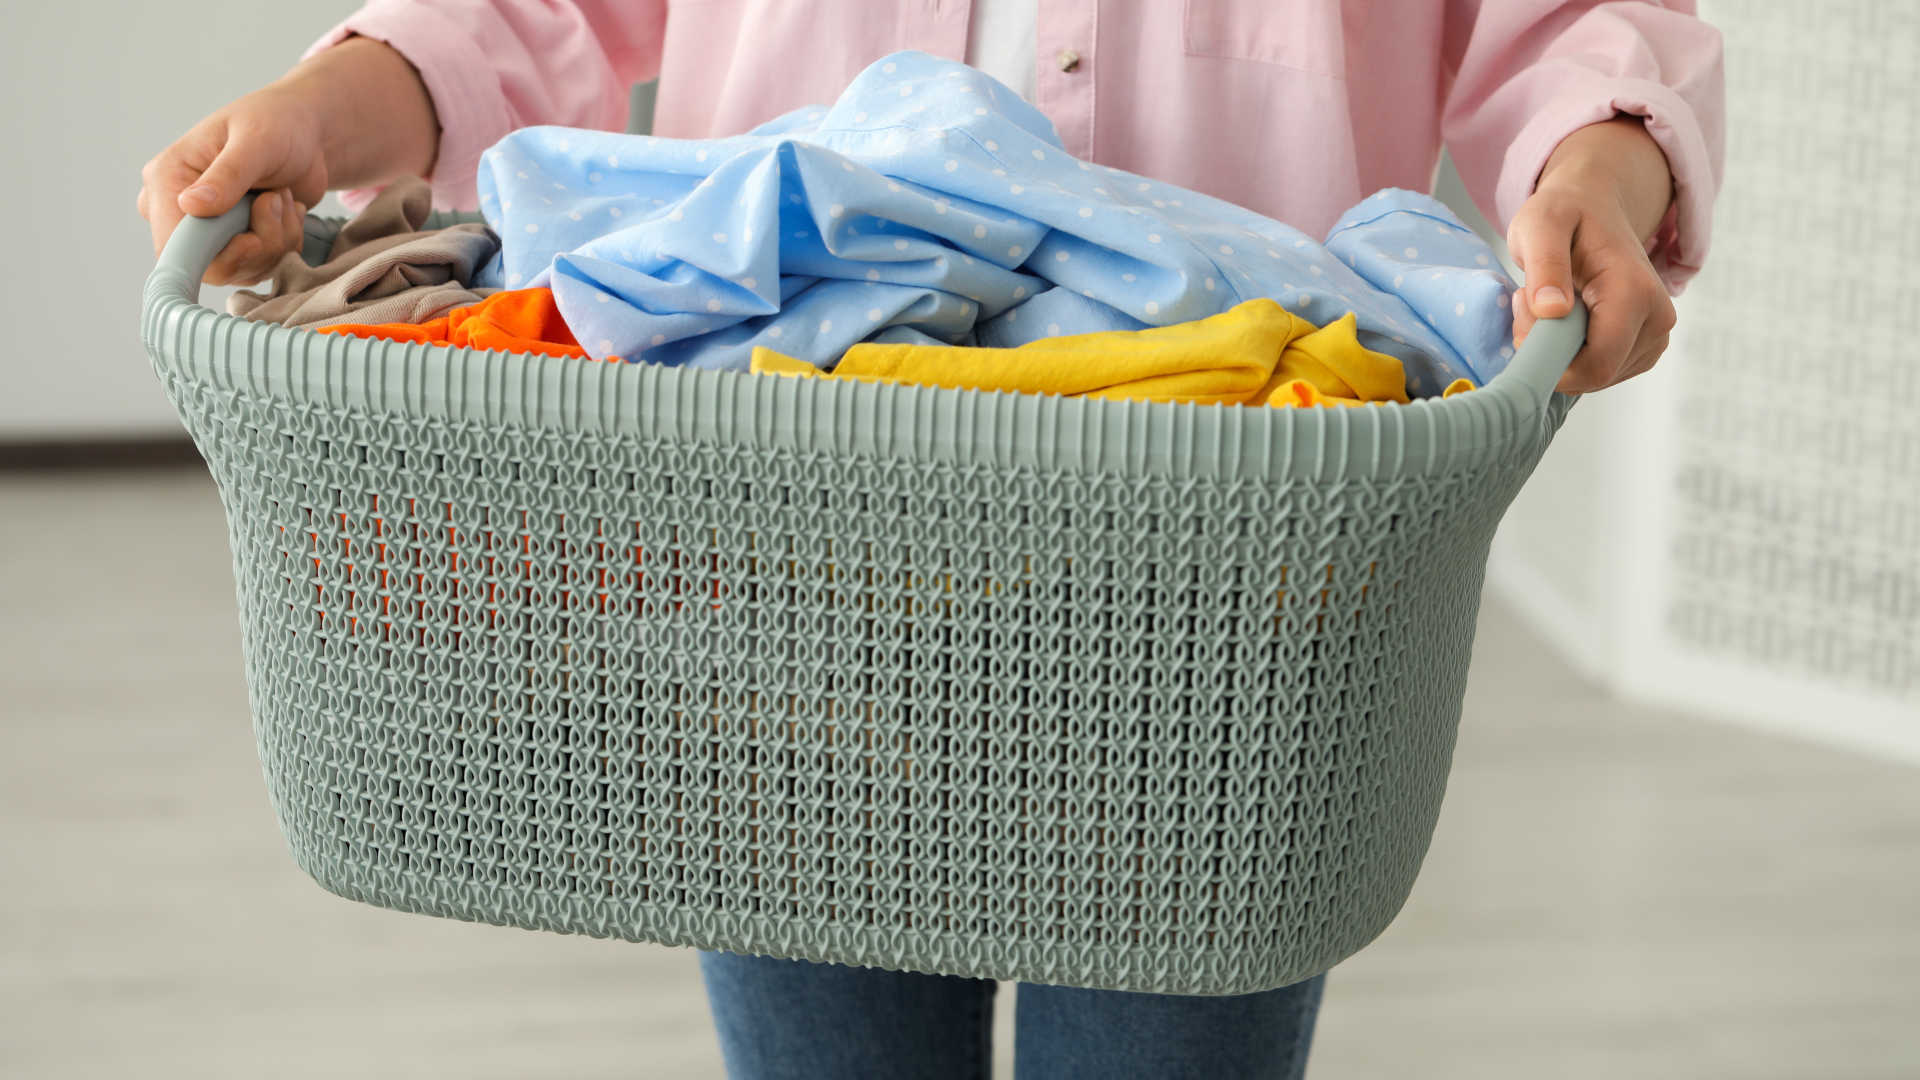 Laundry 101: The Ultimate Fabric Washing Guide